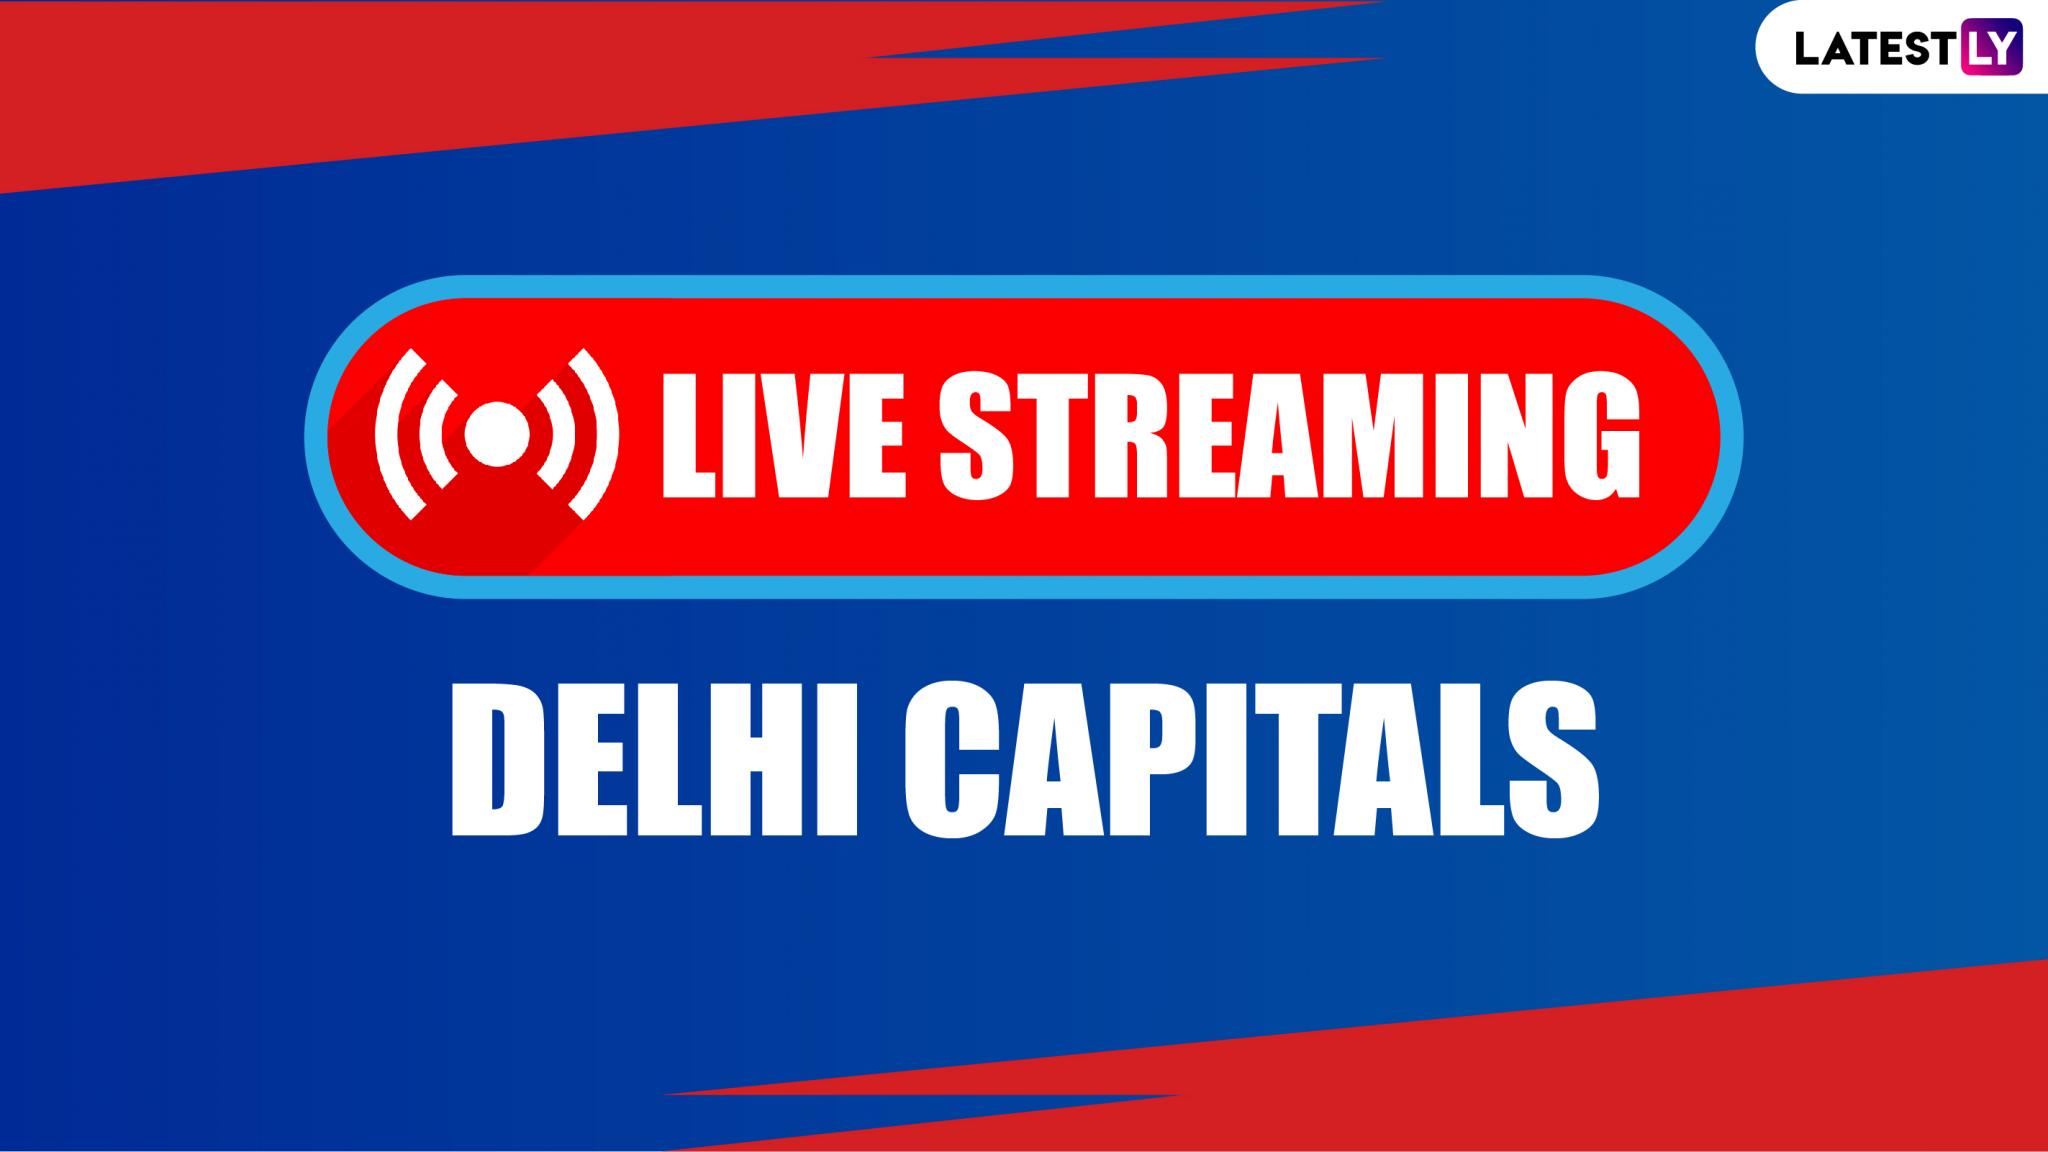 Cricket News Dream11 IPL 2020 Live Streaming Online and Telecast of DC Matches on Star Sports 1 Hindi 🏏 LatestLY